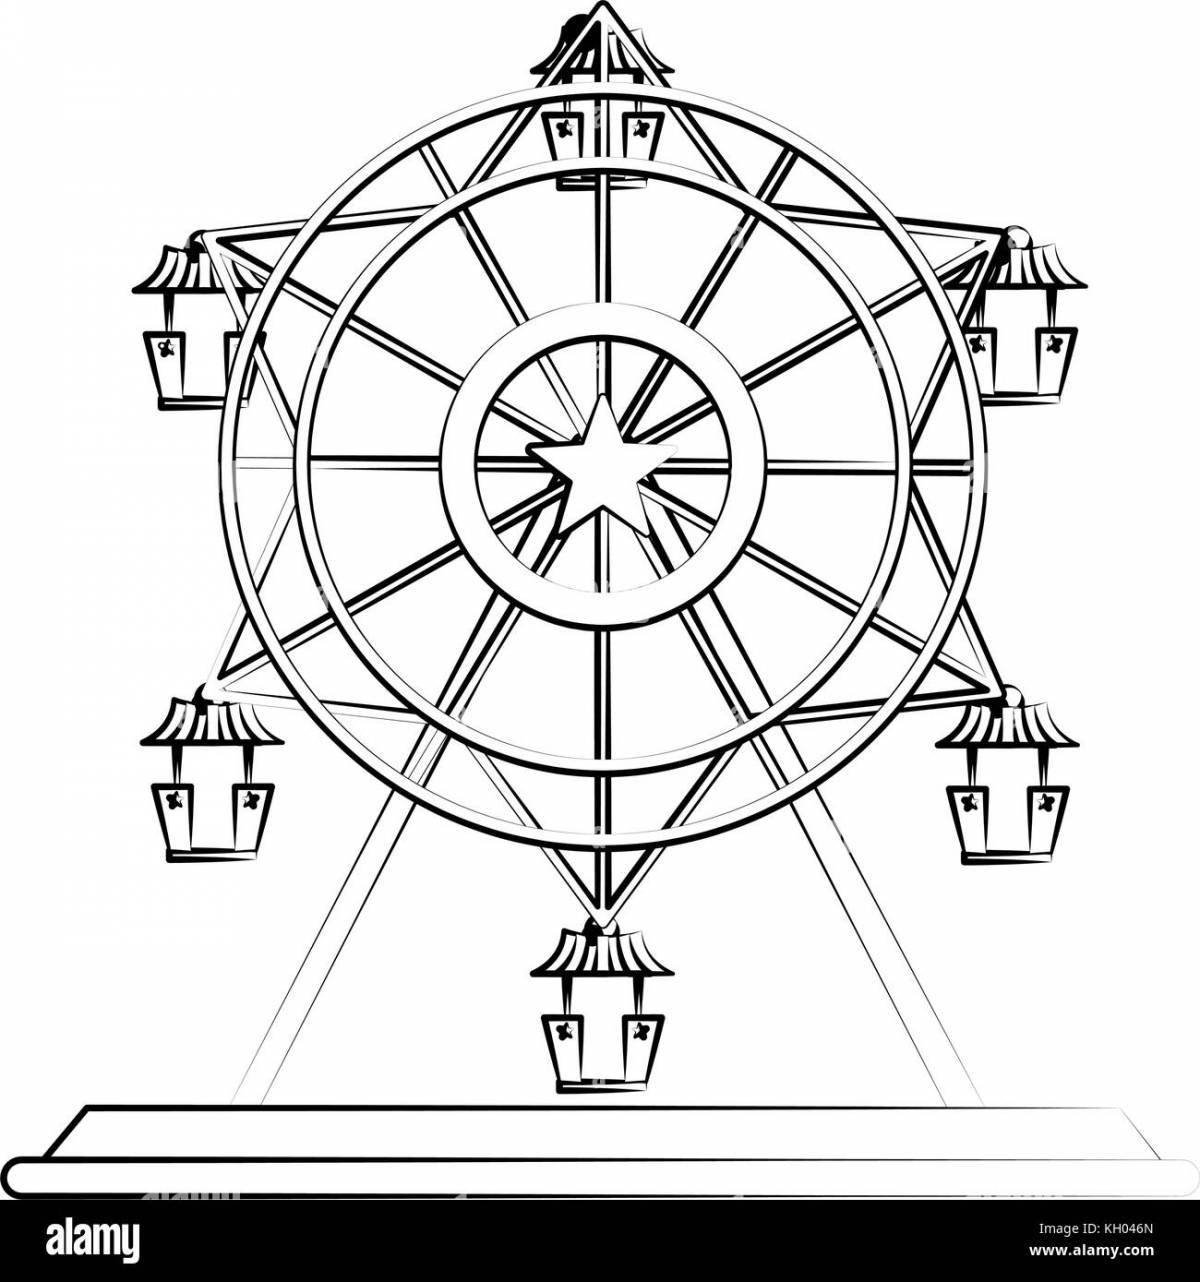 Colorful ferris wheel coloring pages for kids